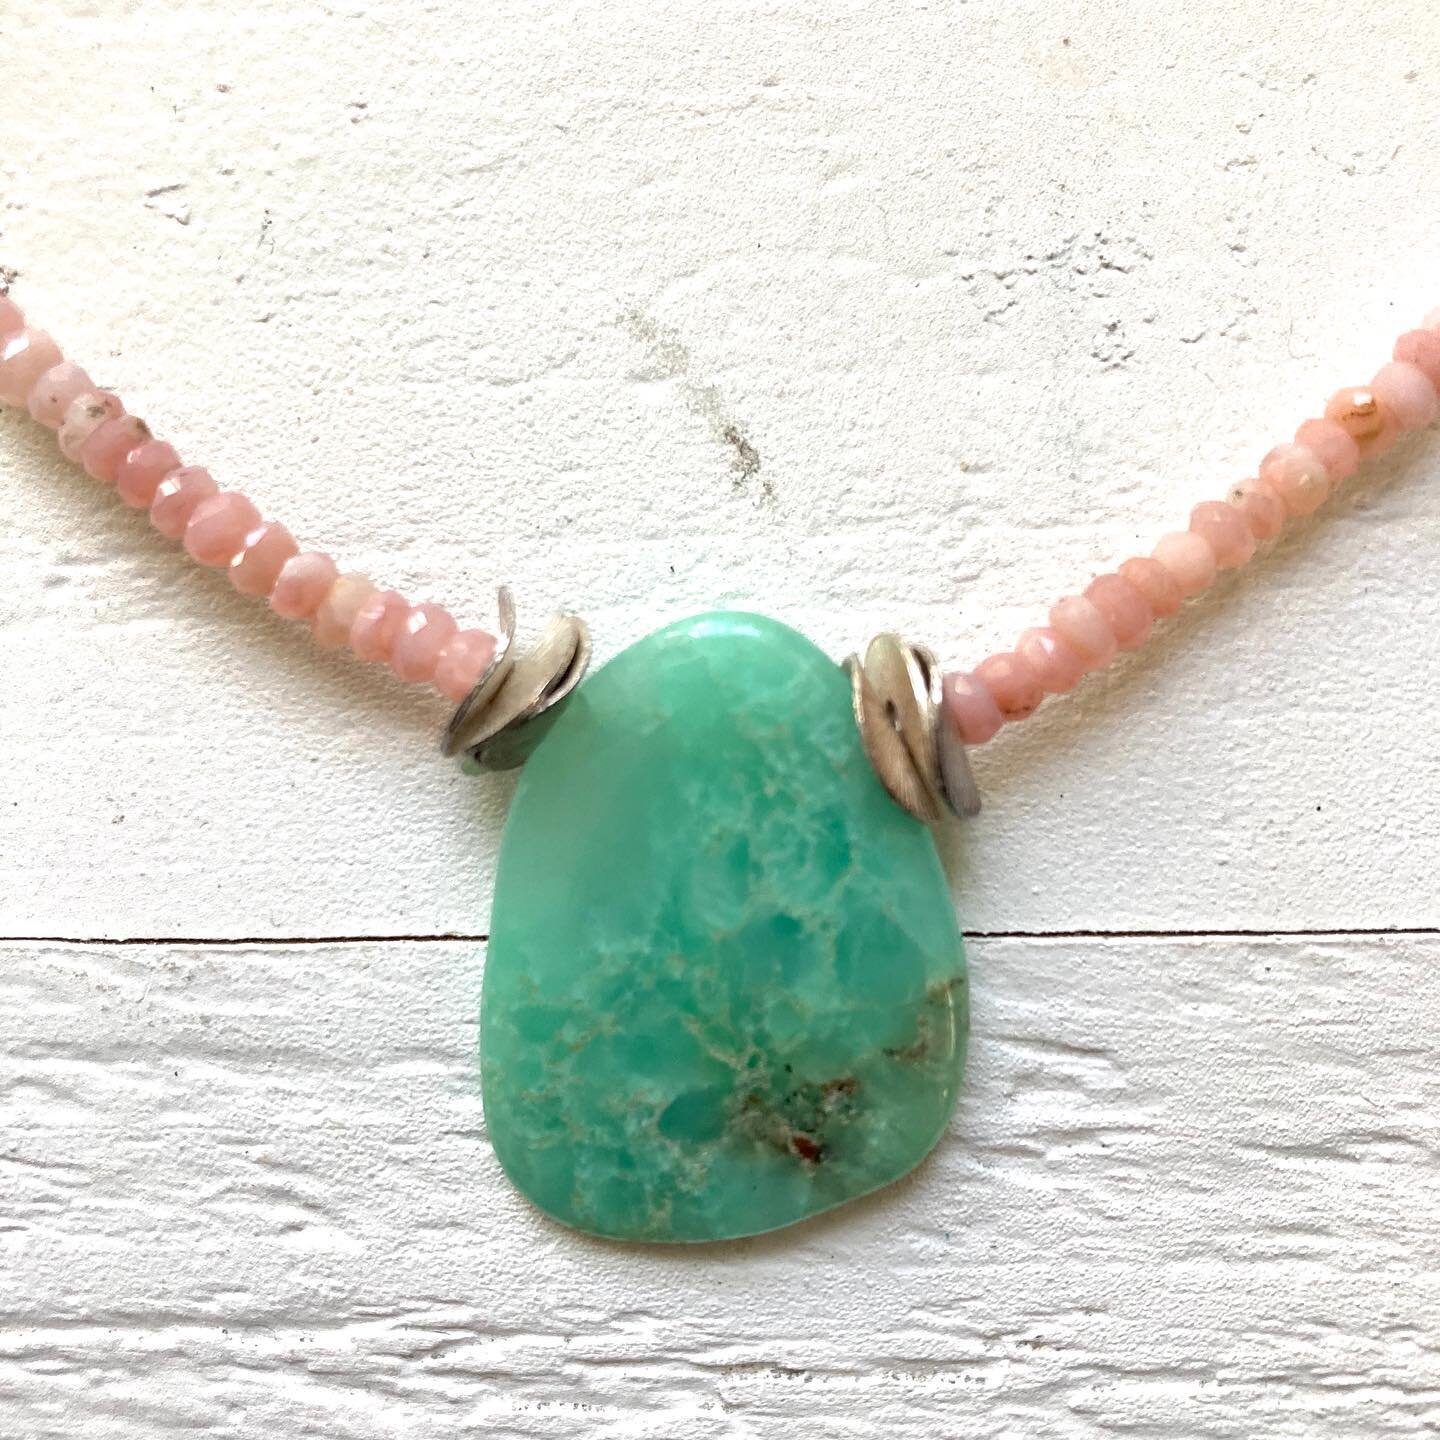 ✨
Summer Street Studio Peony Collection 🌸 🍃 
✨
Pink opal, thought to help restore emotional balance, is paired with a single chrysoprase stone, believed to promote balance, adaptability, and hope.
✨
Sterling chain, flex wire and clasp. Adjustable 1